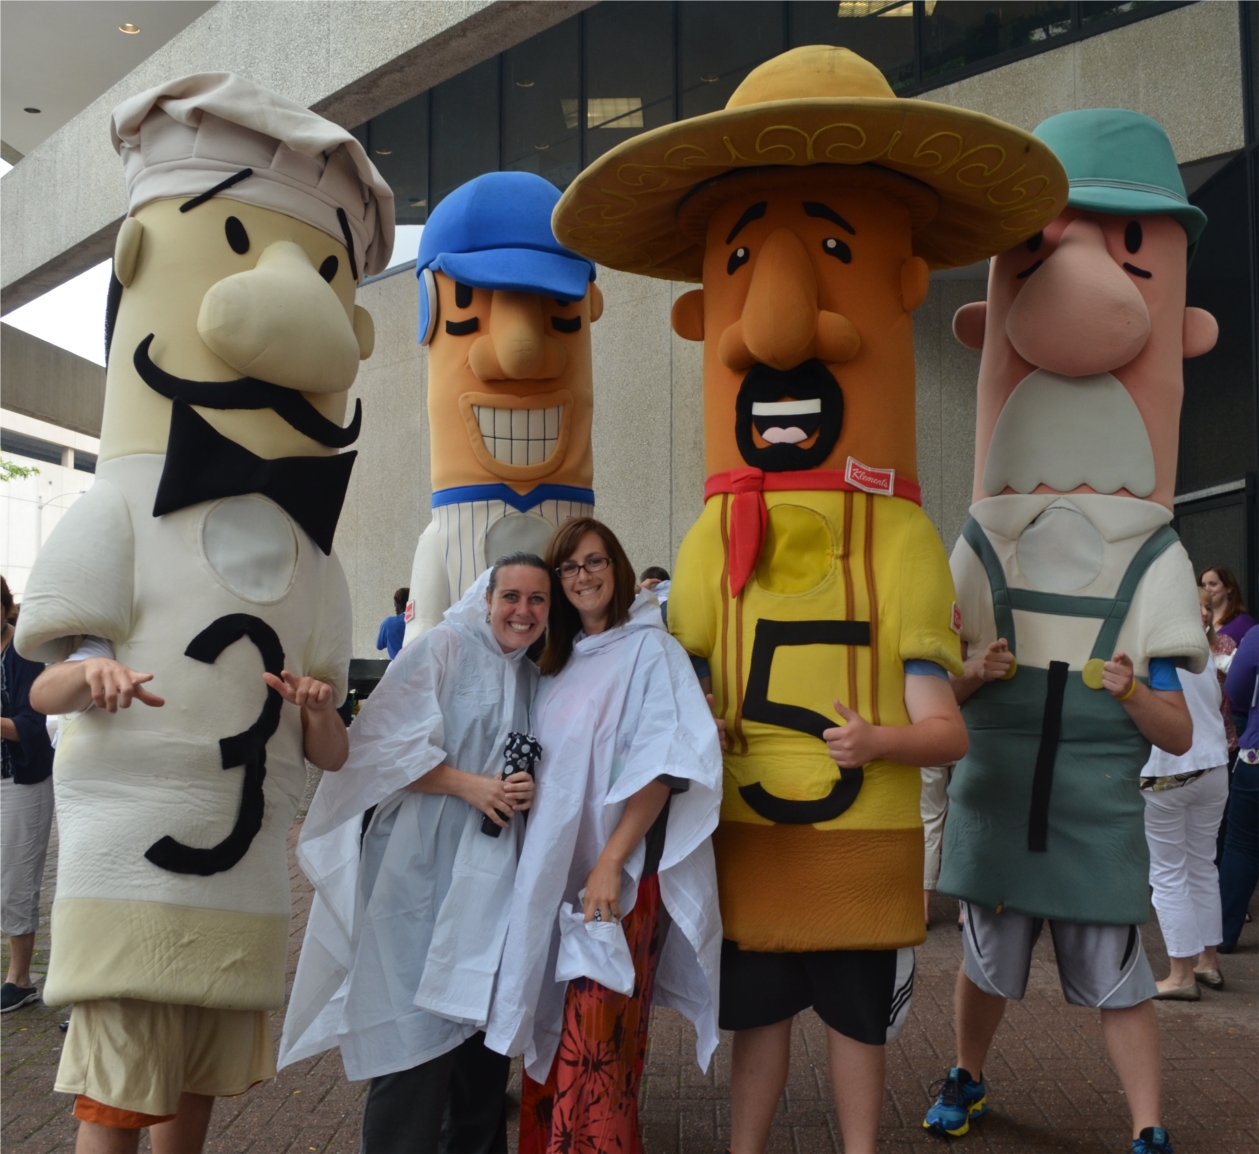 Assurant Health employees enjoy a (rainy) summer block party with the Milwaukee Brewers Racing Sausages – this is one of several surprise events planned throughout the year to thank employees for their contributions. From left: Rachel Frosch, Heidi Fischer